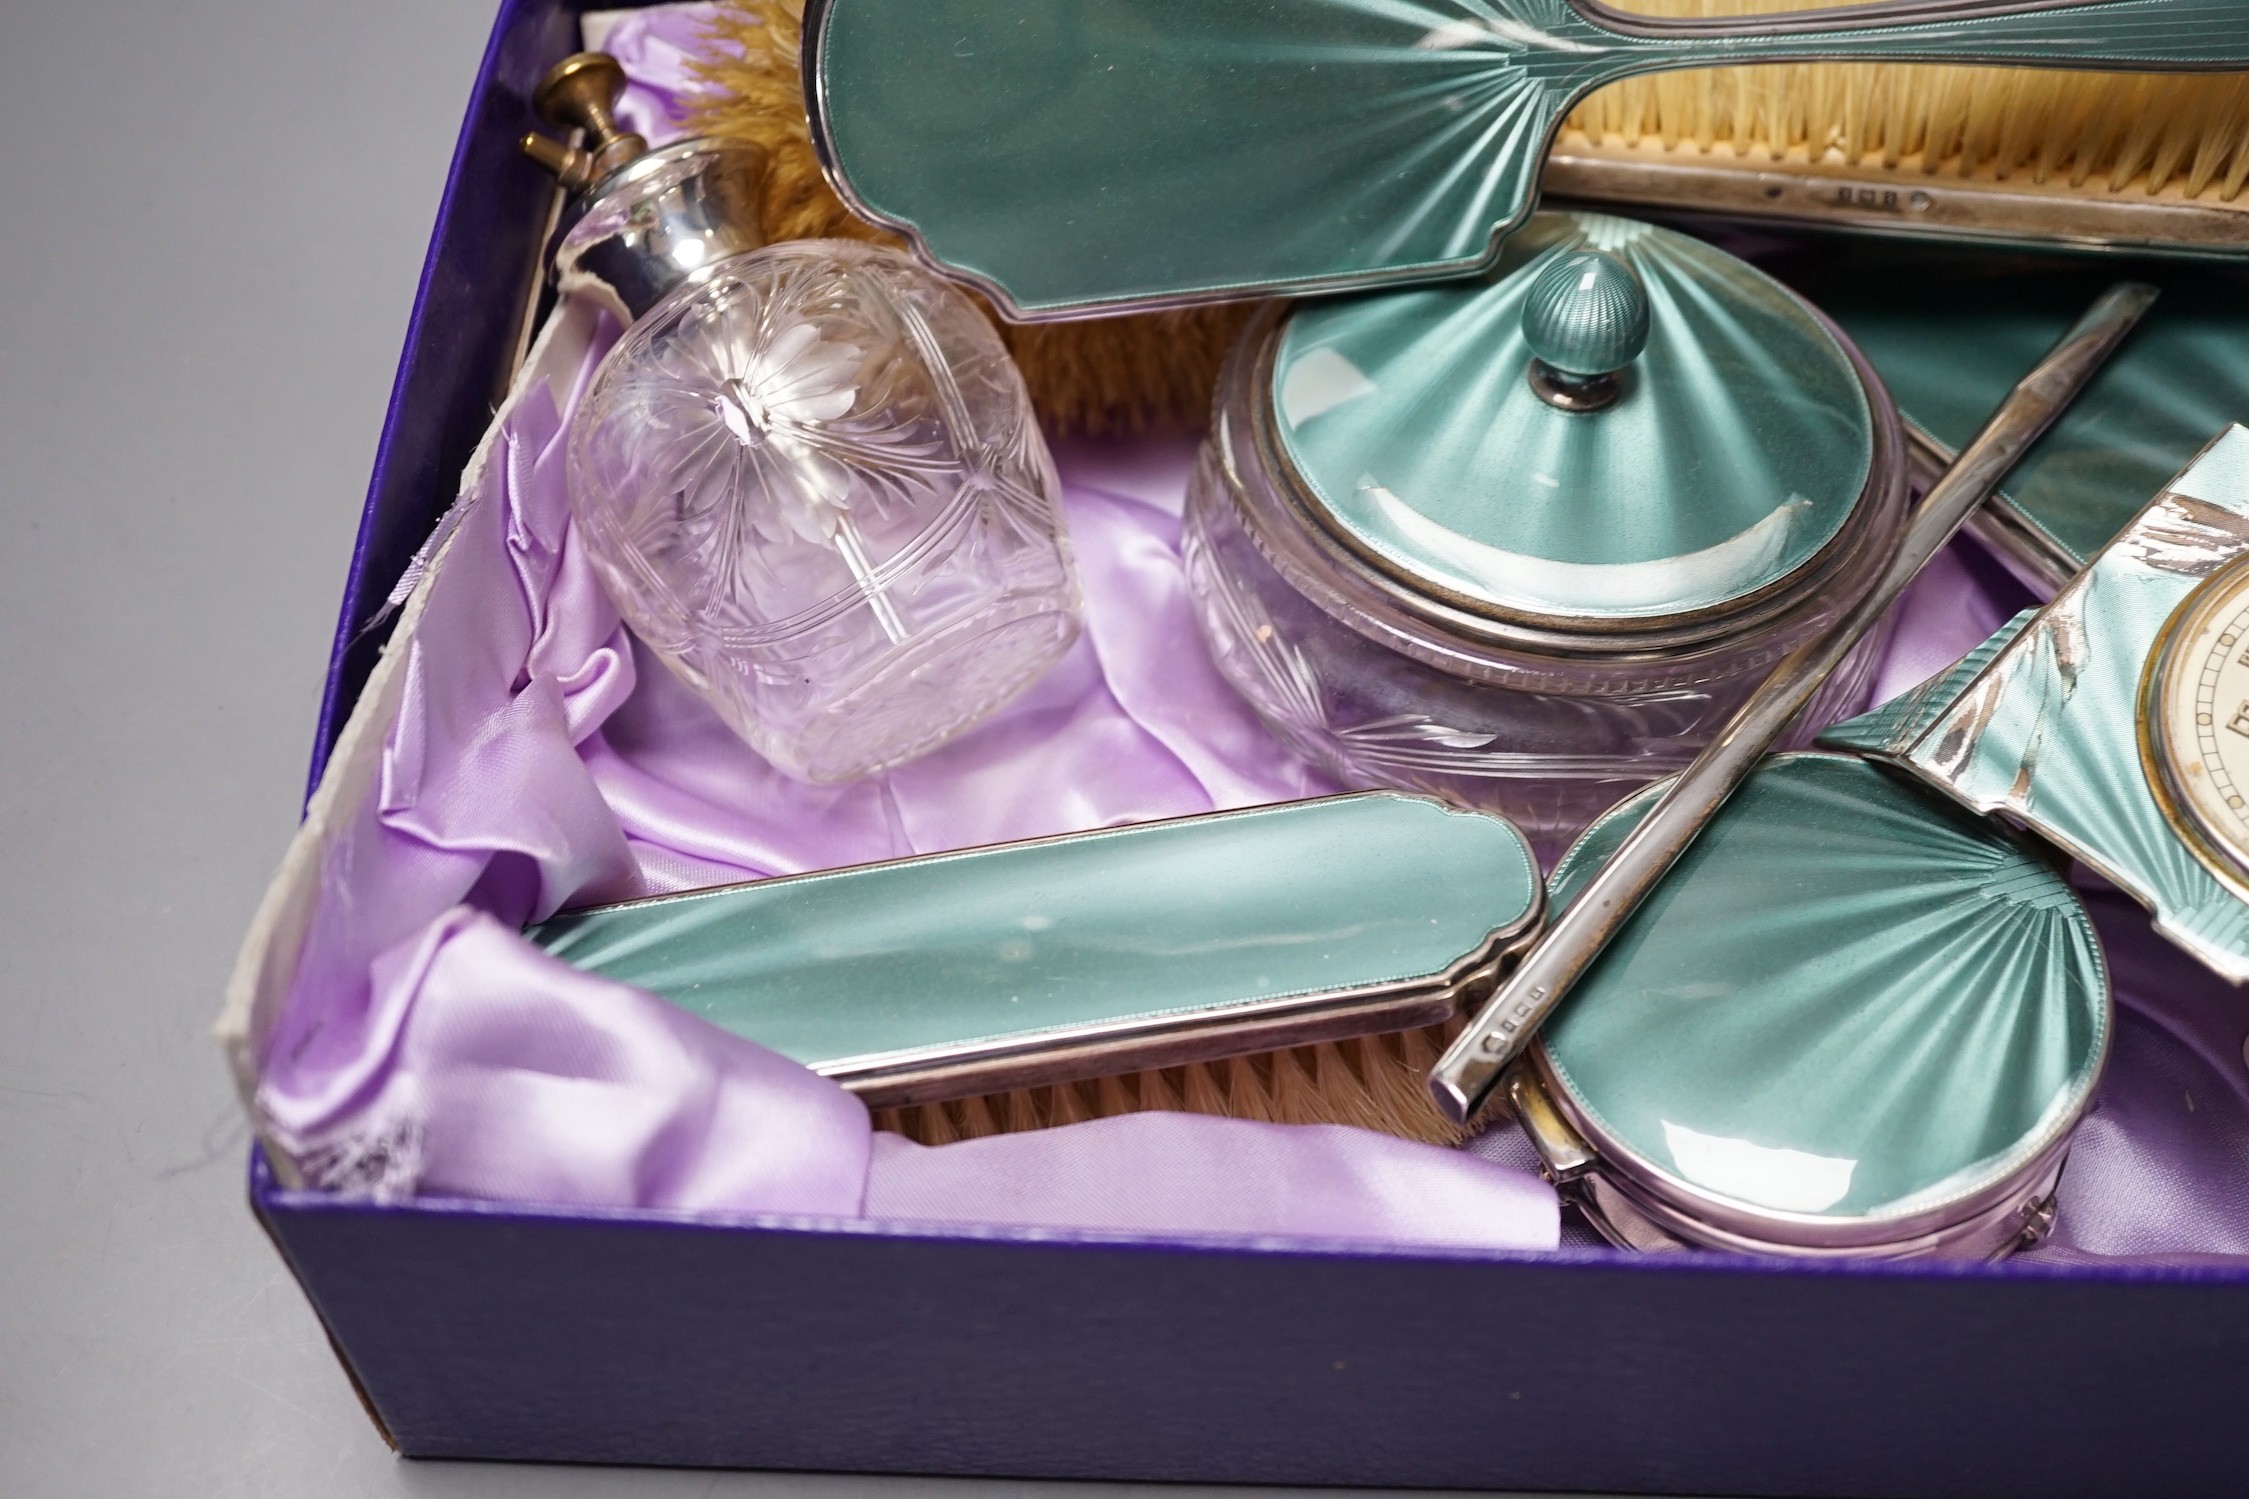 A George V silver and green guilloche enamel set nine piece dressing table set, by Albert Carter, Birmingham, 1933/4, together with a similar unmarked timepiece, comb teeth missing and enamel a.f.